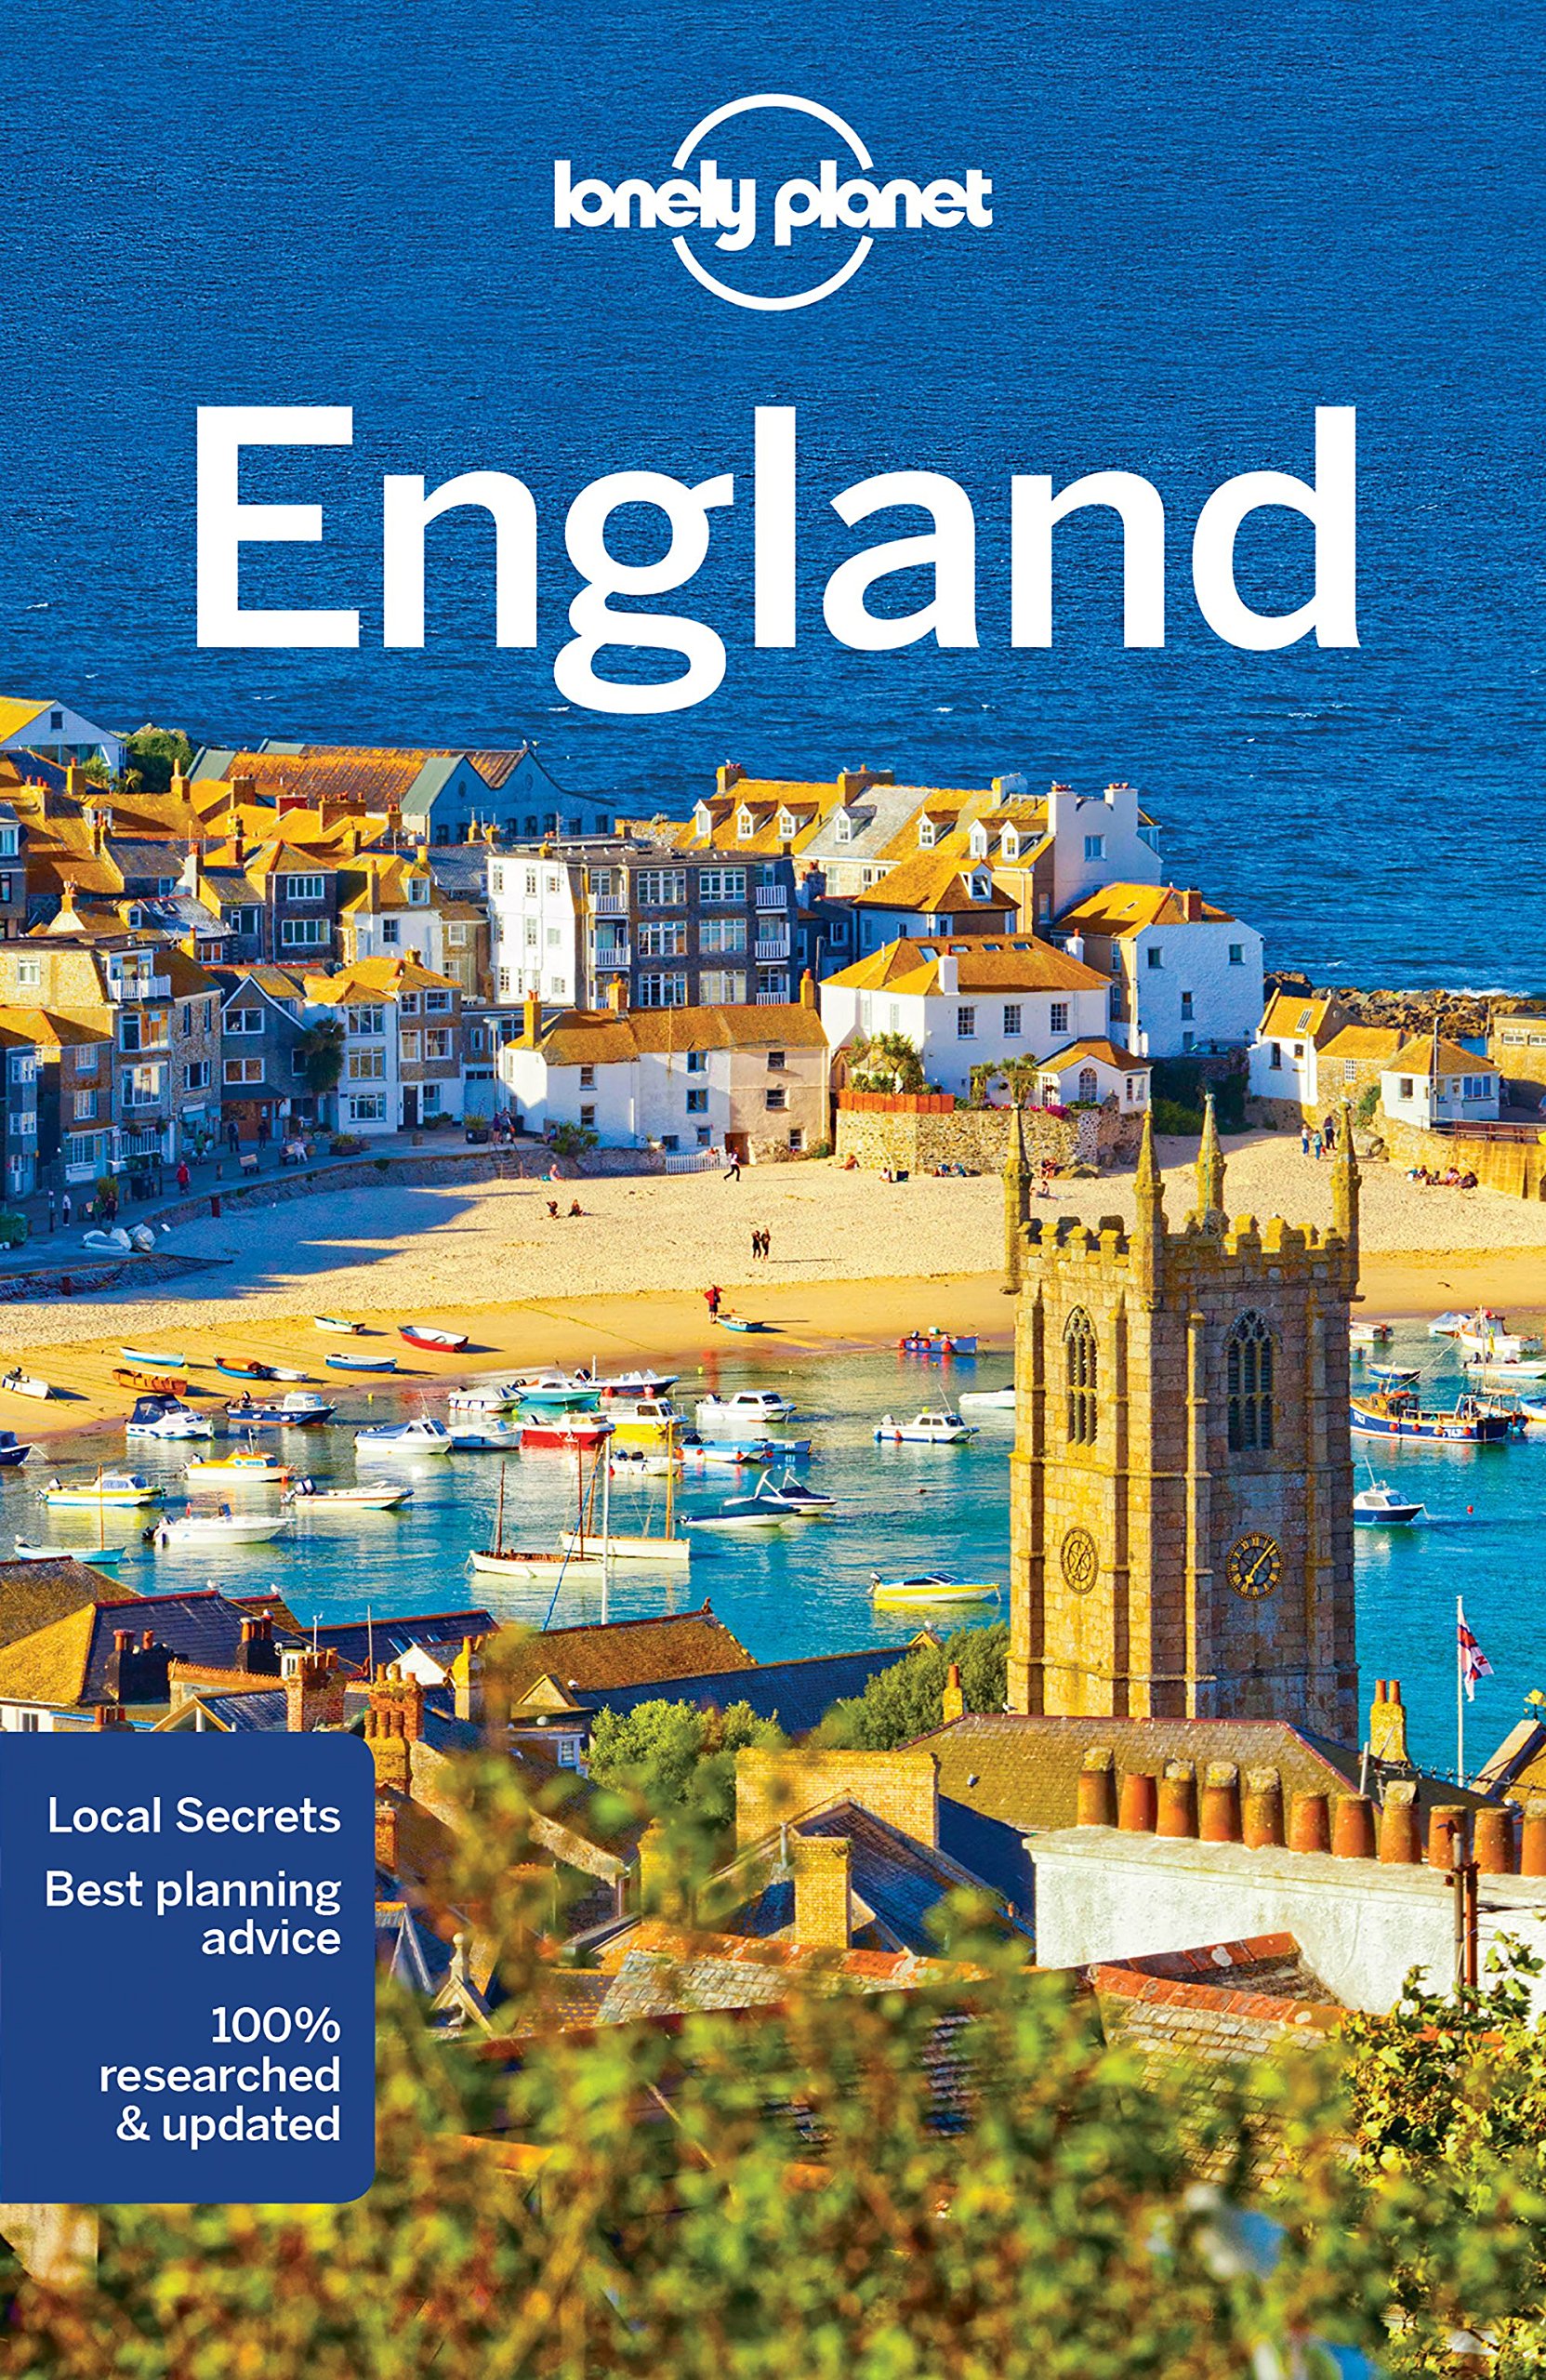 Planet　England　Guide　Travel　Lonely